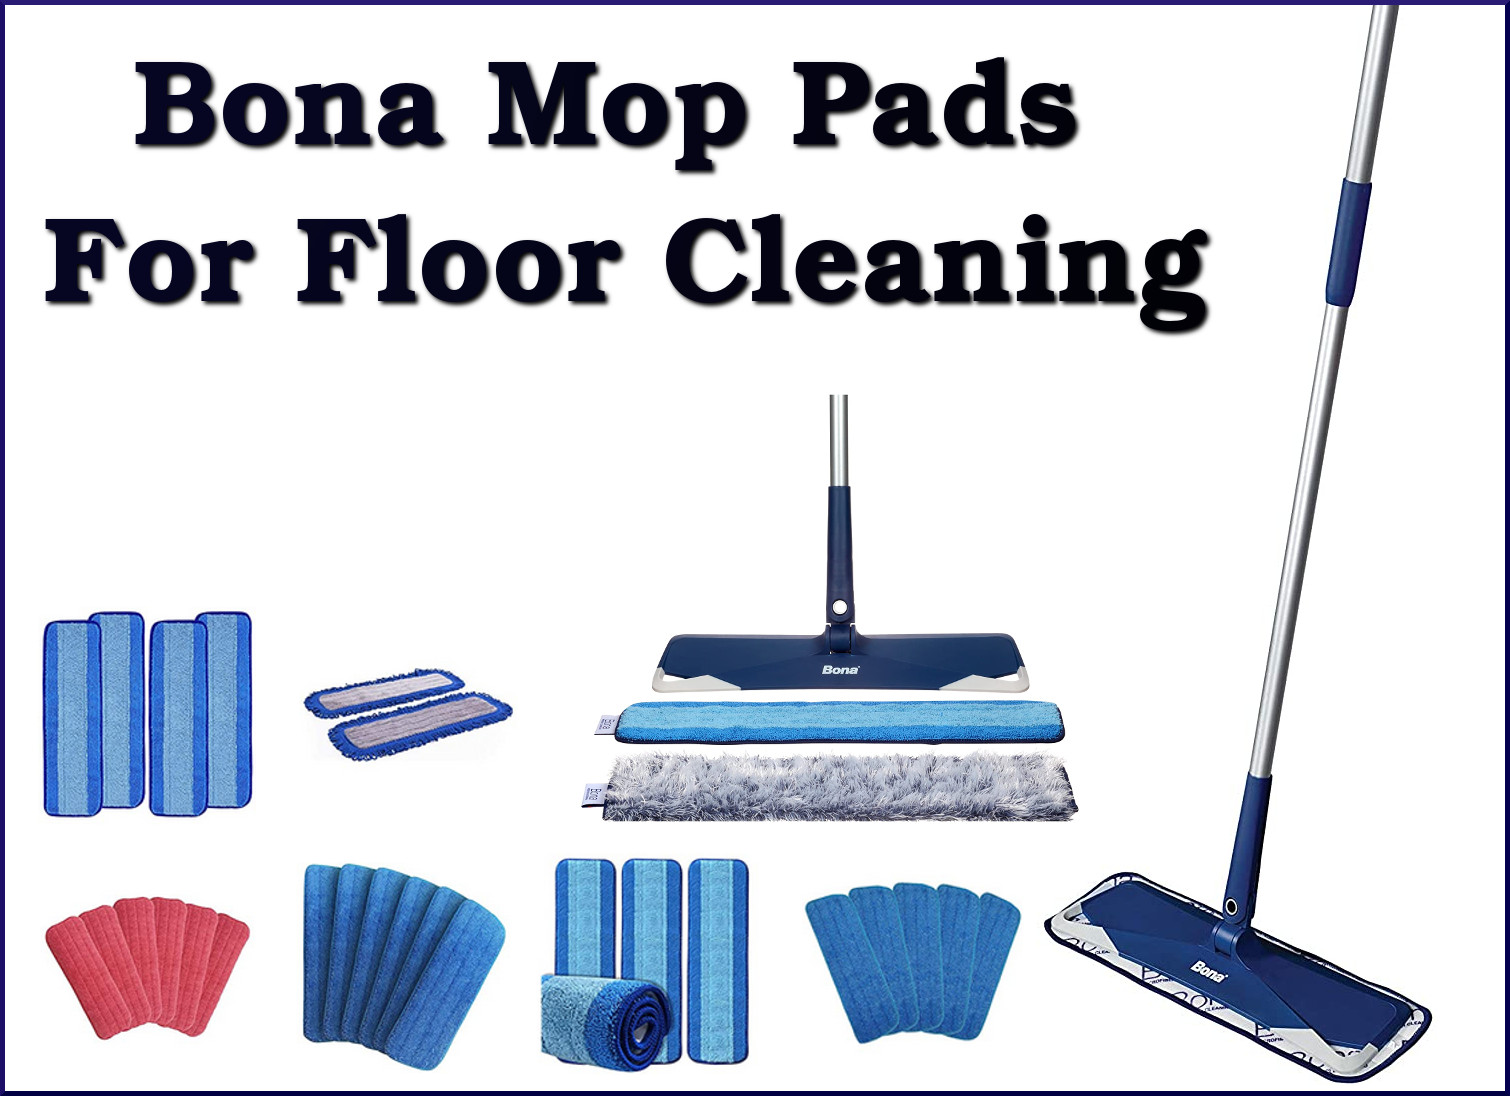 Microfiber Mop Pads For Floor Cleaning with Bona Mops